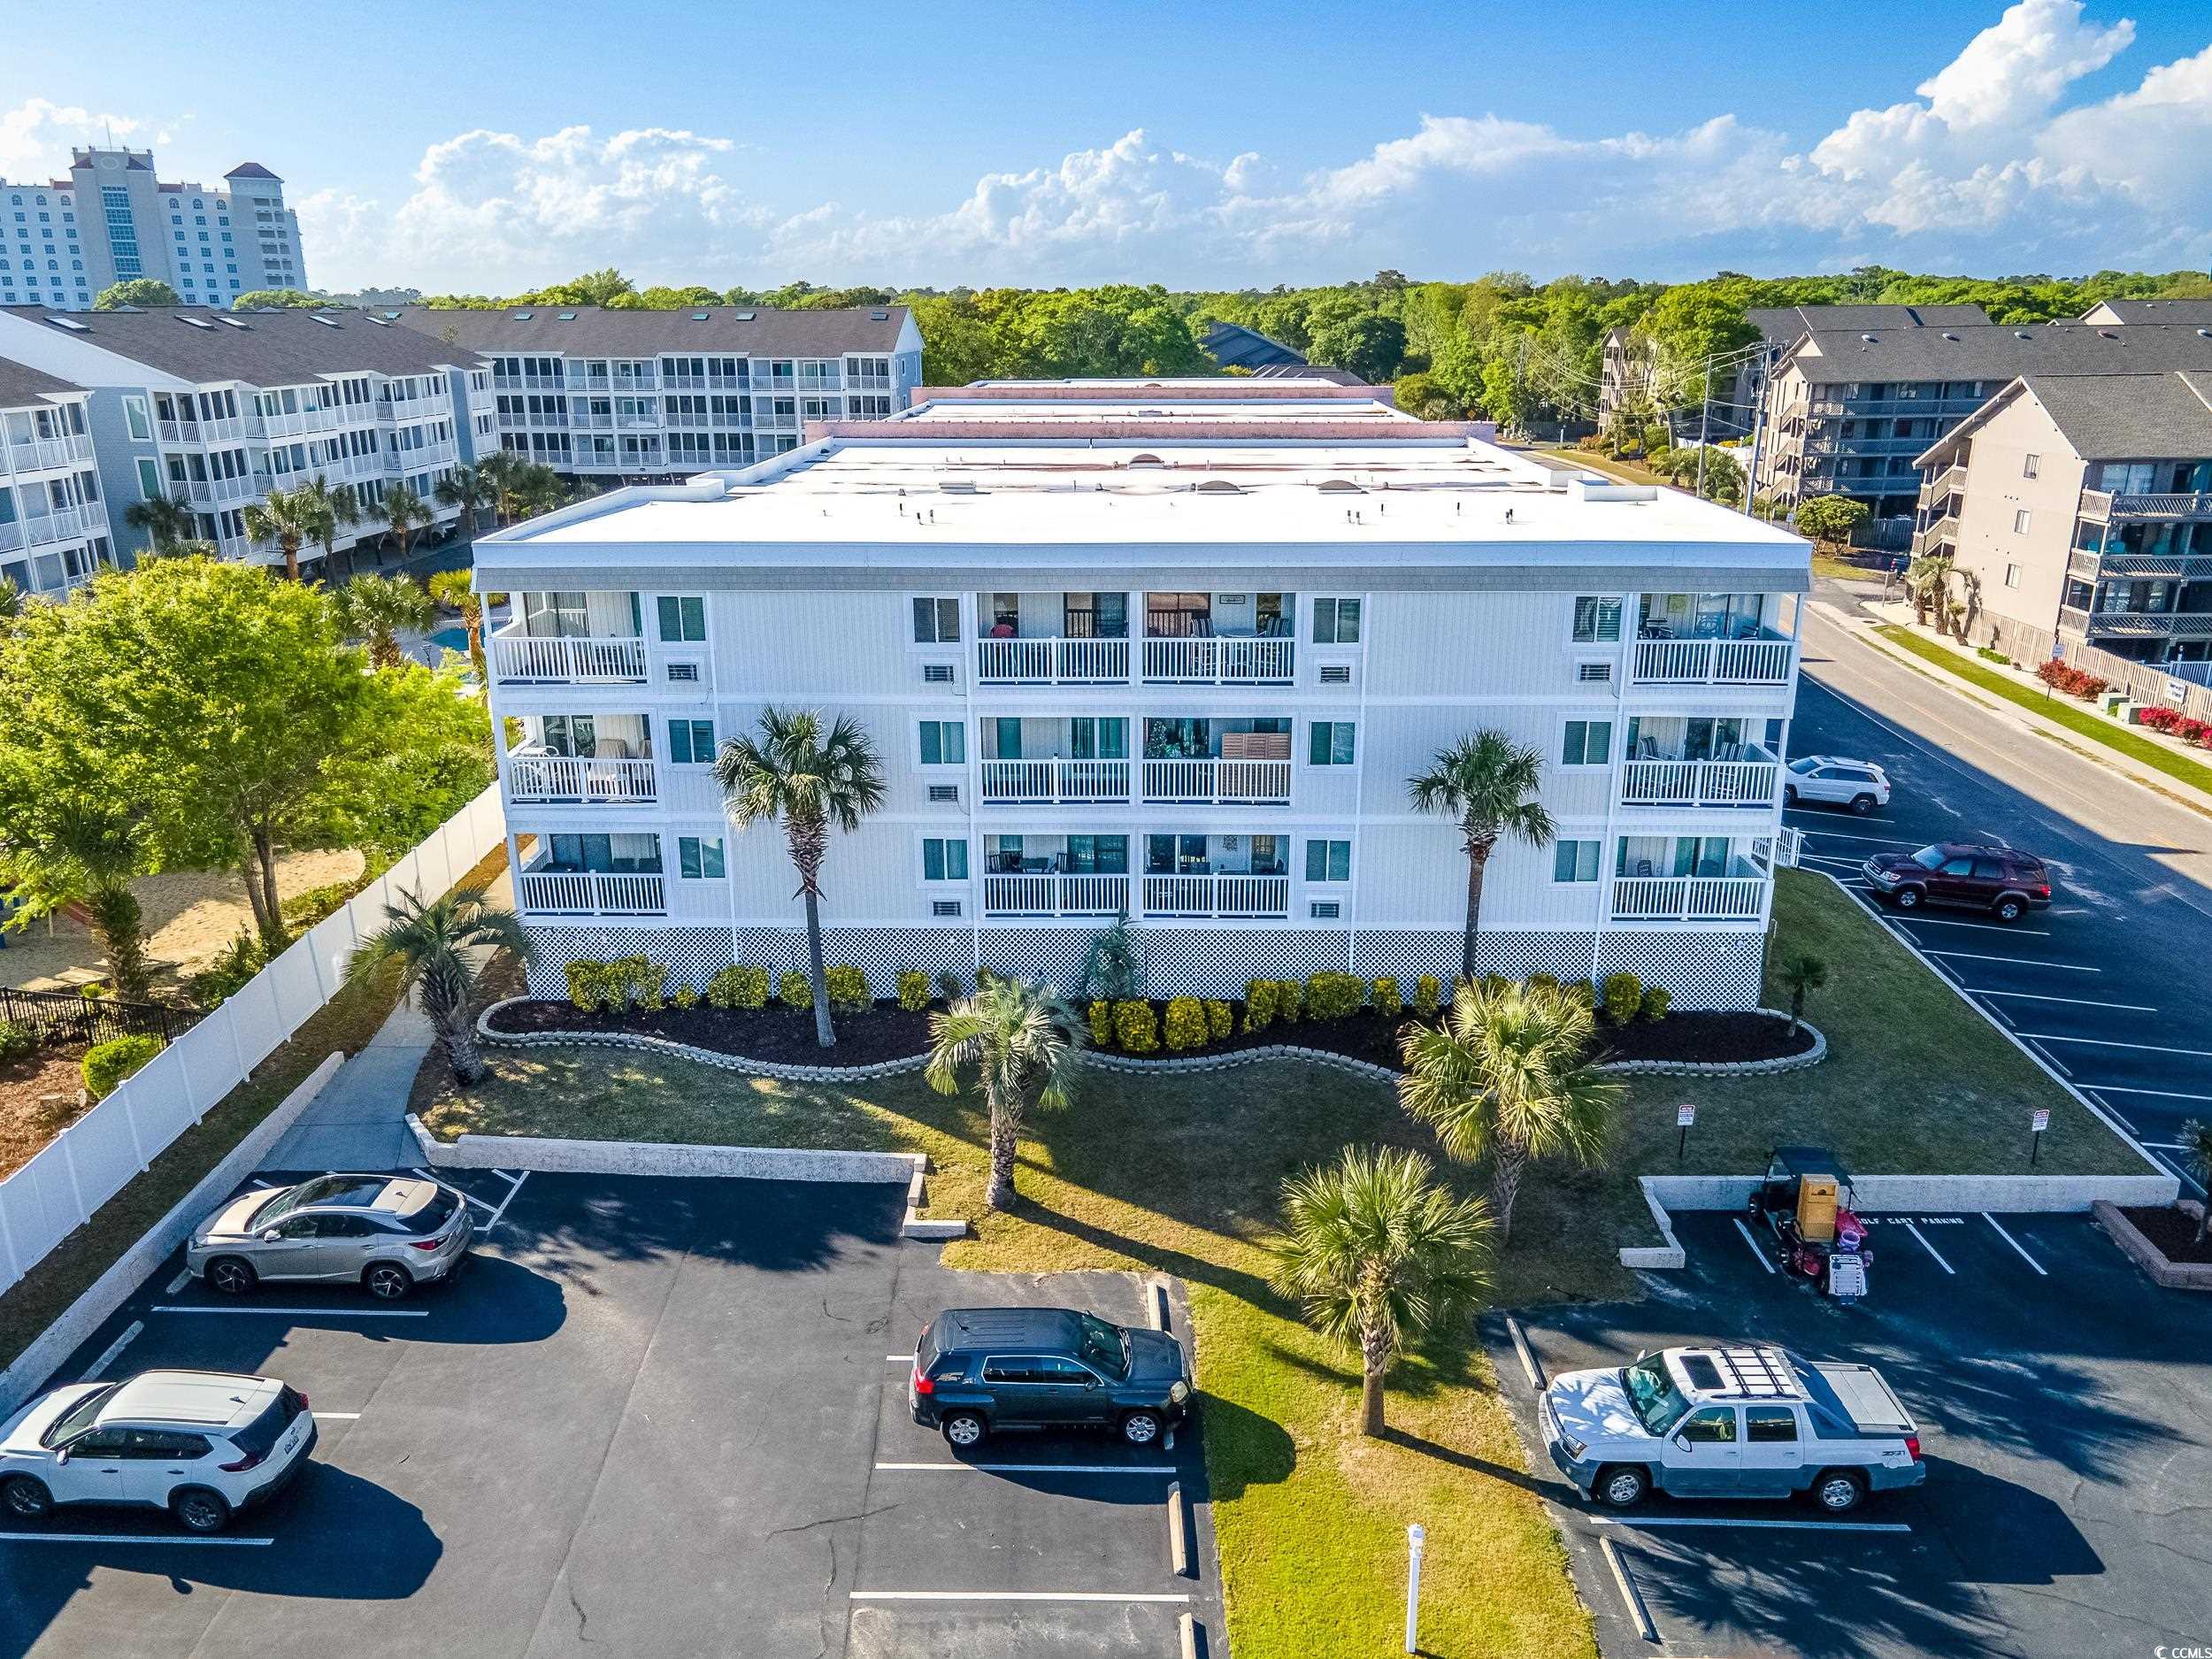 great opportunity now available in the highly sought after building located on shore drive, a place at the beach. this 2br/2b unit is just steps to the beach and comes fully furnished. the unit offers an open kitchen/living area, spacious bedrooms, flat screen tvs and balcony overlooking the pool area. this complex is conveniently located in the arcadian section of myrtle beach just off shore drive, which is close to hwy 22 & 31, tanger outlets, barefoot landing, restaurants, championship golf and more. make an appointment today!